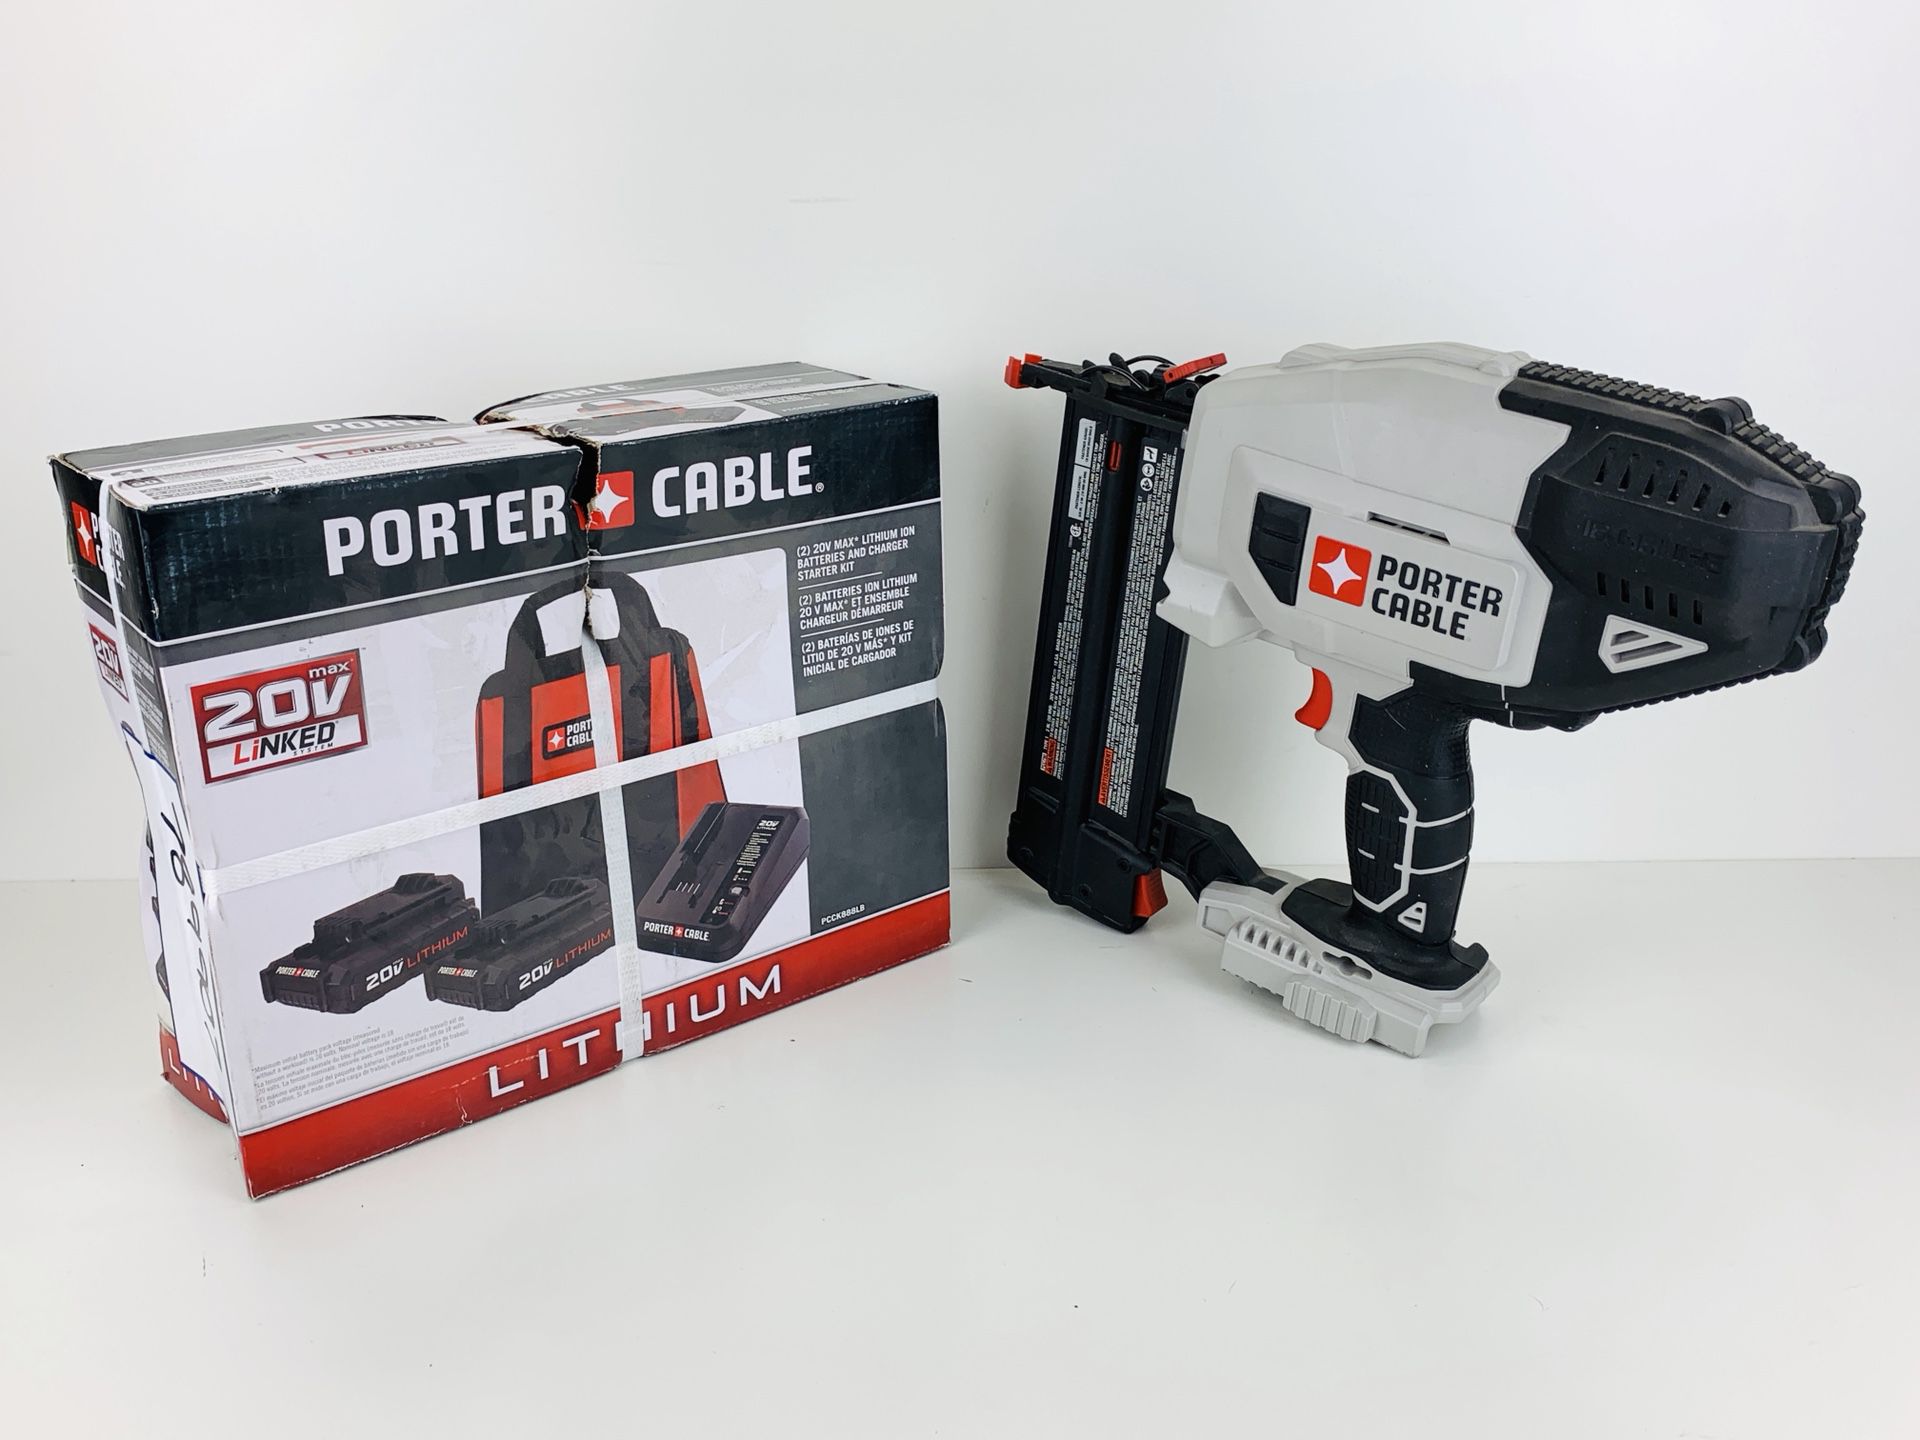 Porter-cable finishing nail gun and battery bundle